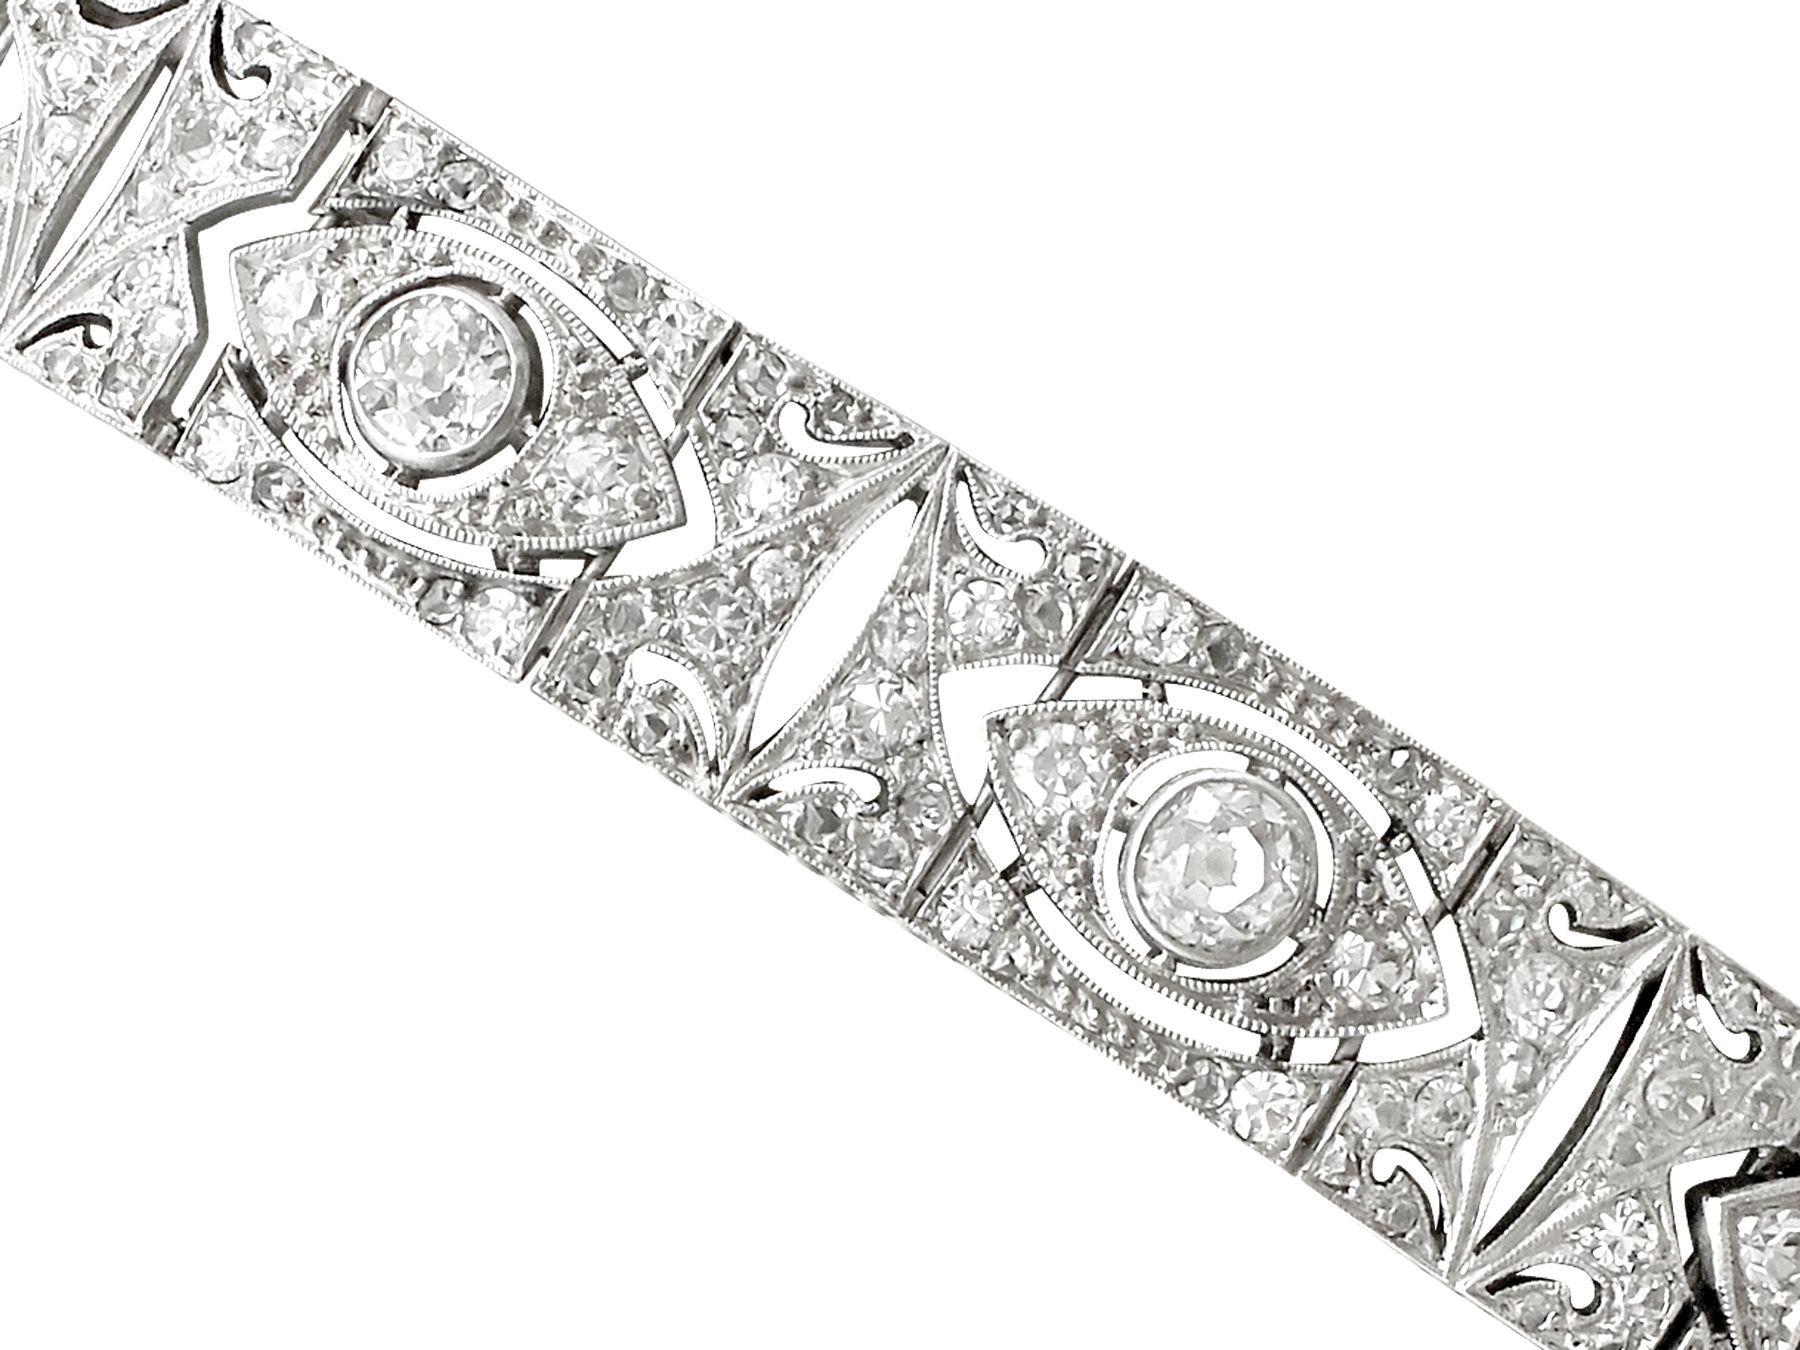 1930s Antique 4.63 Carat Diamond and White Gold Bracelet In Excellent Condition For Sale In Jesmond, Newcastle Upon Tyne